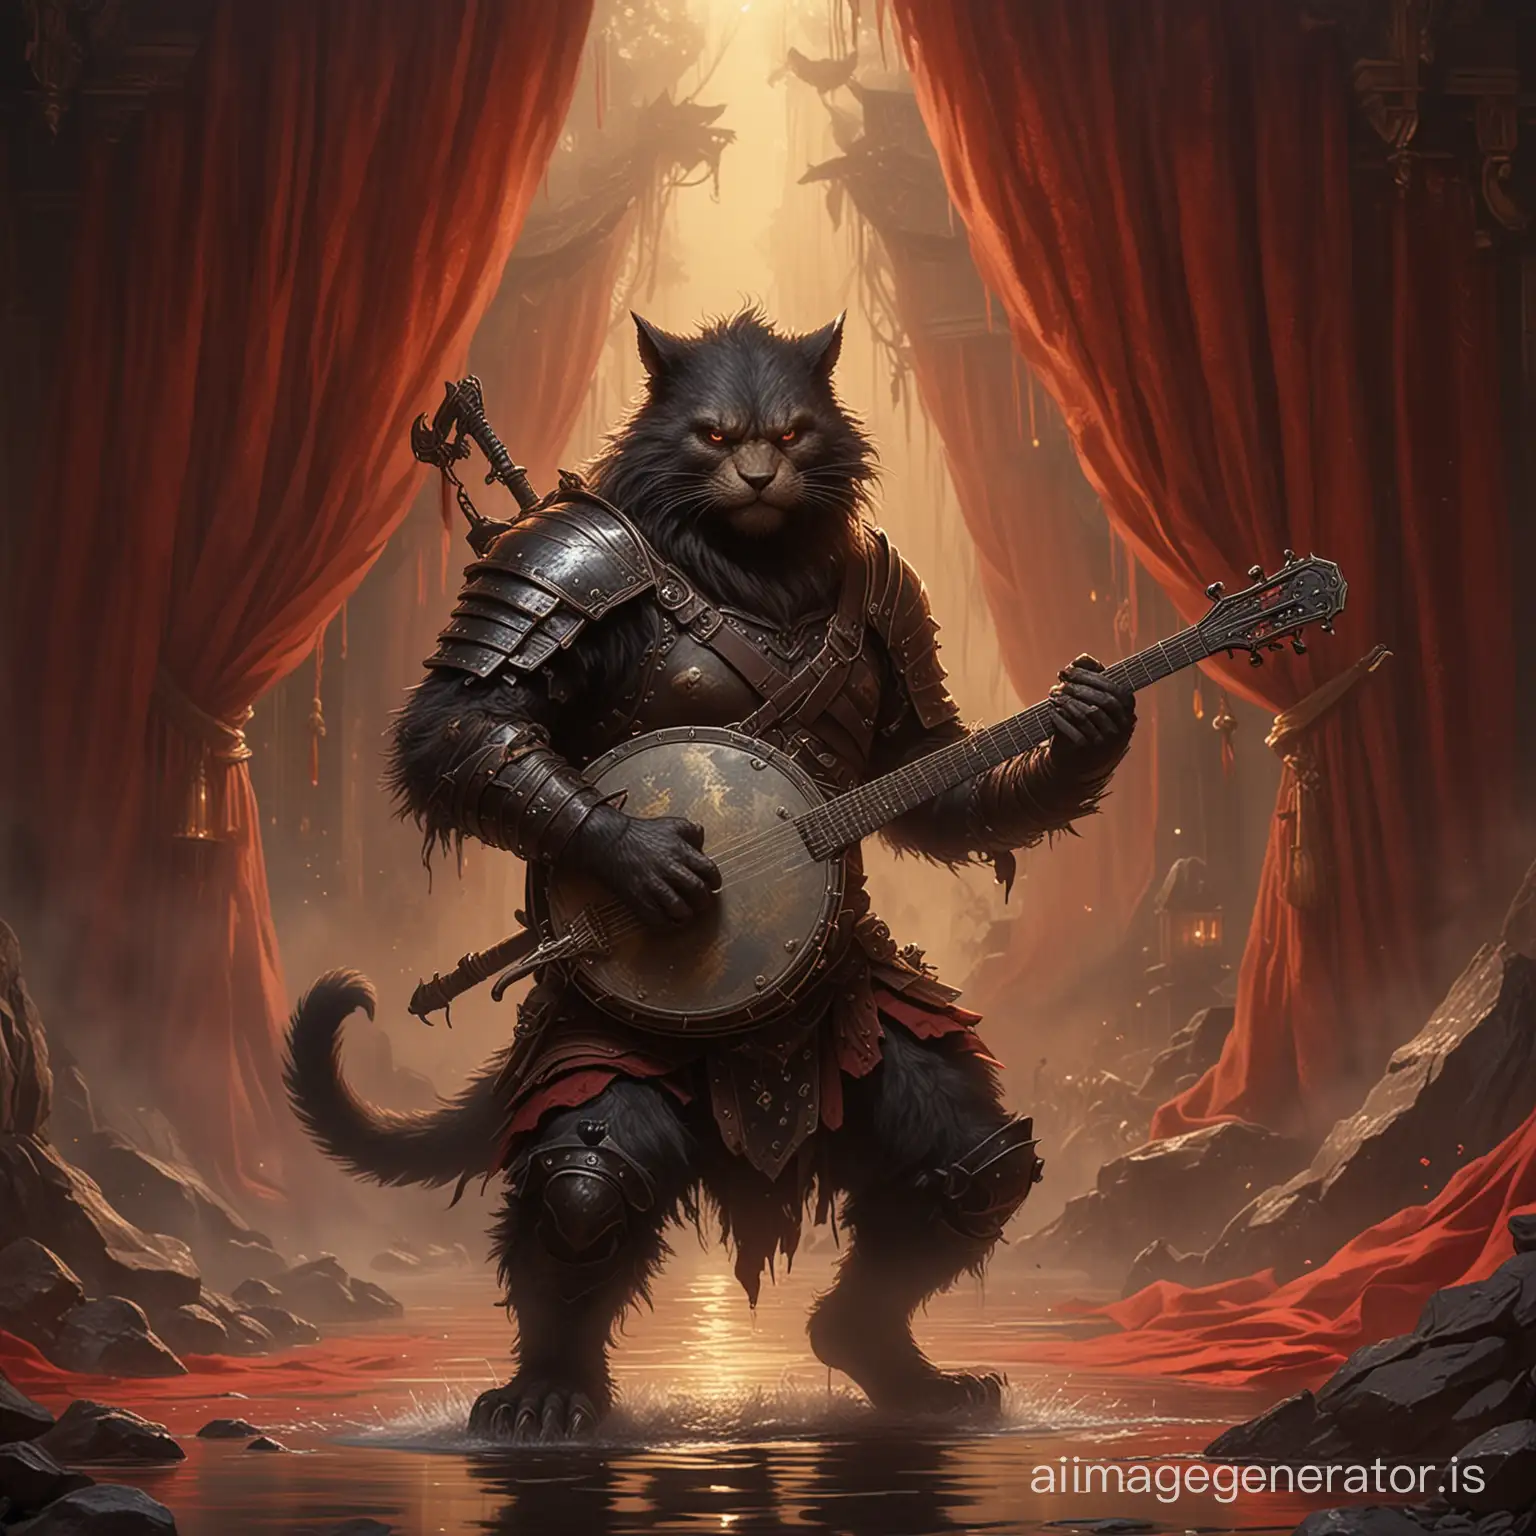 In a mesmerizing display of splashing brushstrokes, an intricate realistic digital painting masterpiece emerges. A bugbear, dressed in dark armor and one  sword in his belt .a banjo on his back. and a hook sword in his hand, with a cat behind him. against a backdrop of backdrop of red curtains surrounded by black smoke and a dark atomosphere of candlelight that showes his obscured figure and emotional intensity. ethereal, otherworldly, insane detail, 